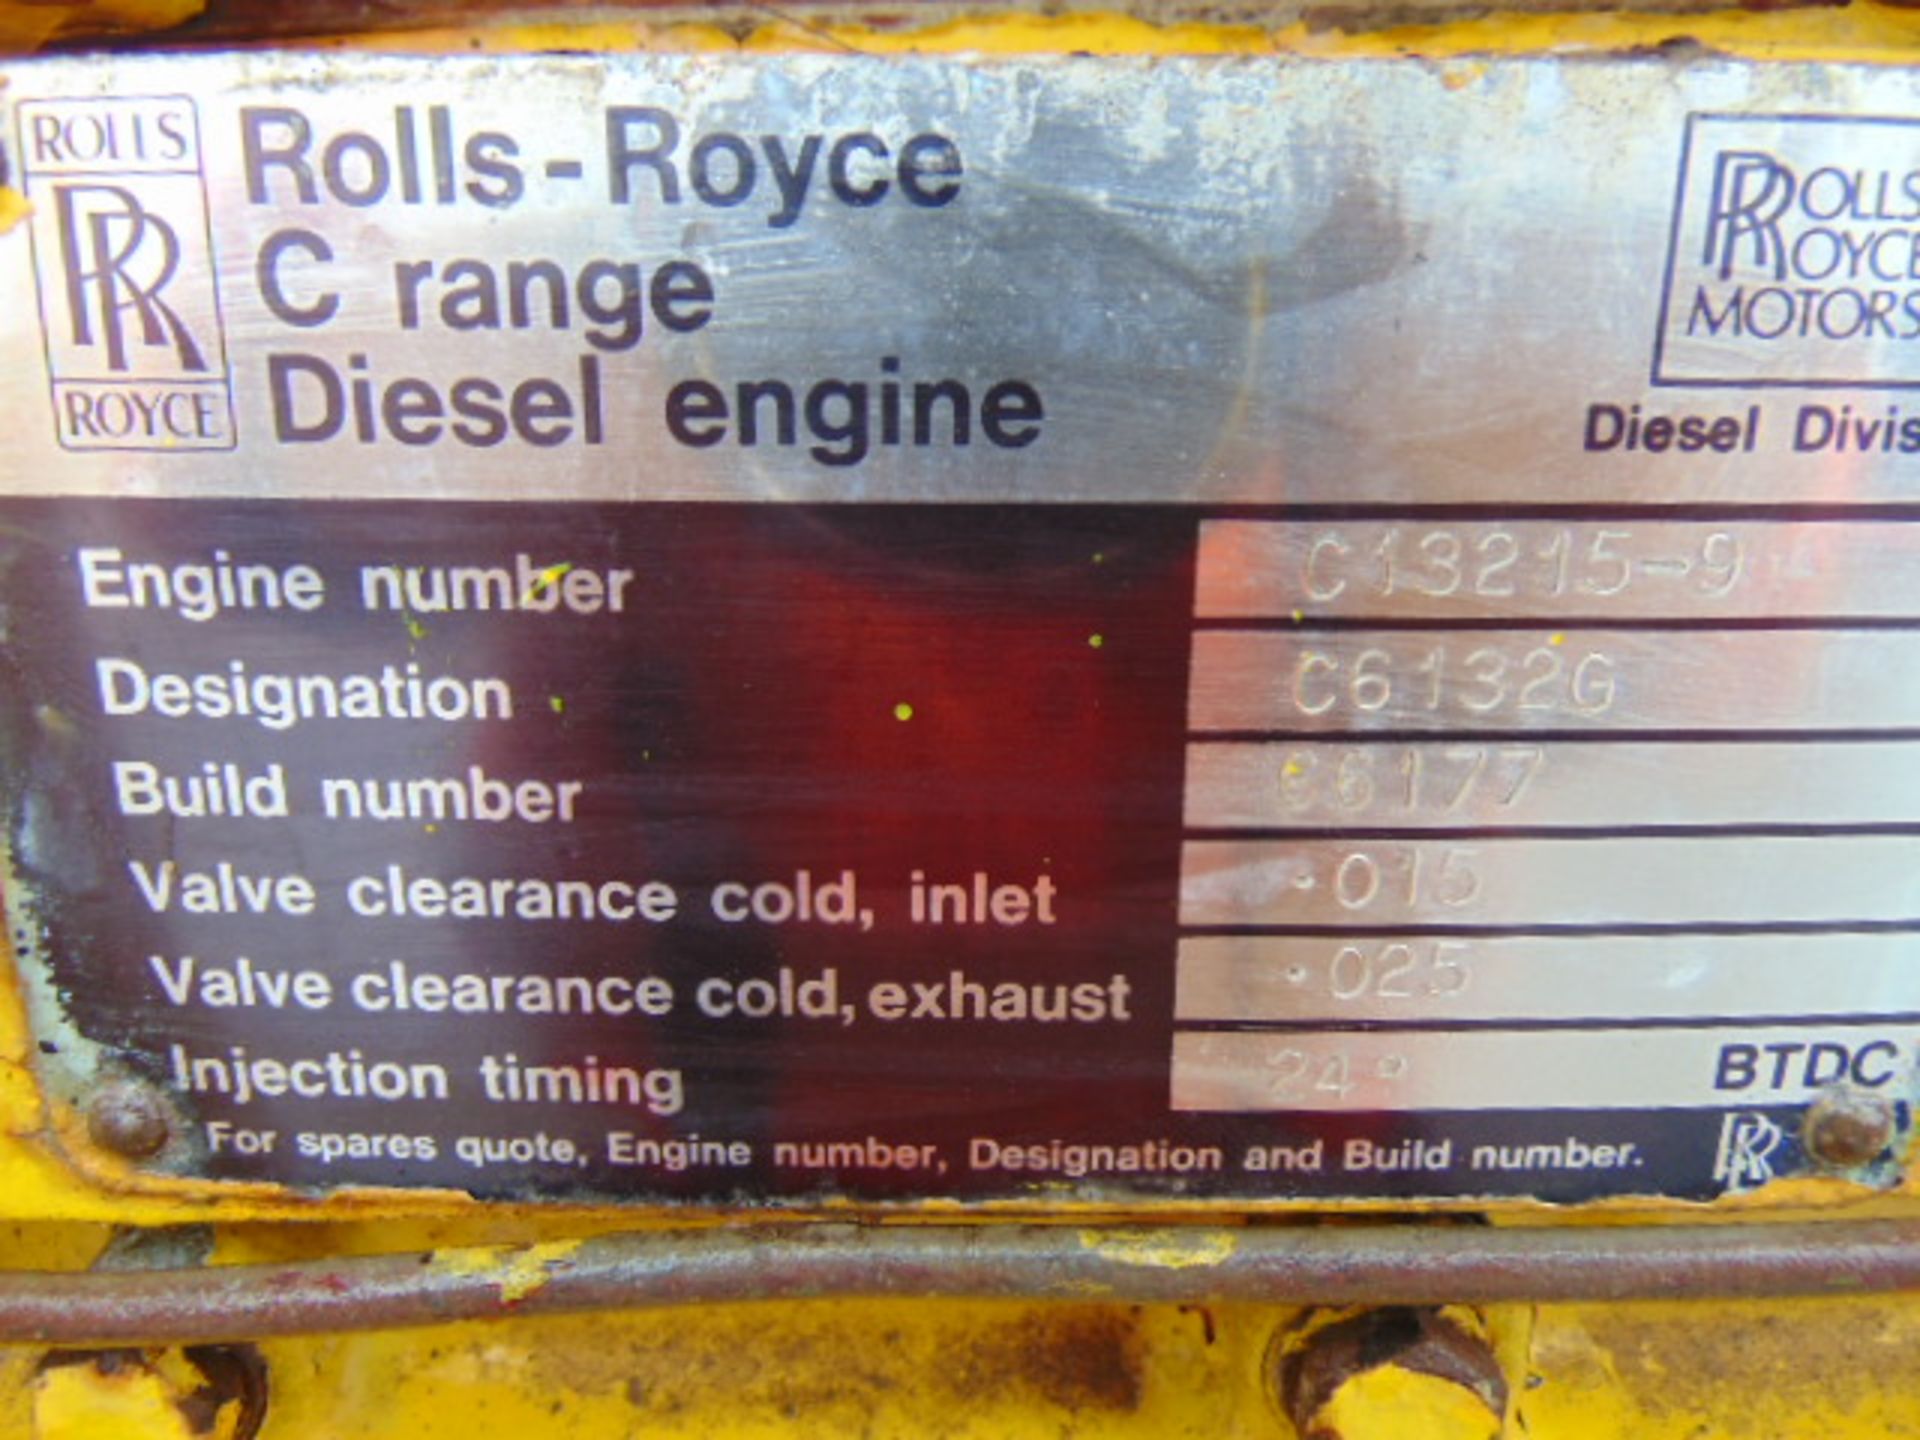 Rolls Royce Diesel Newage Stamford 125KVA Generator with Shannon Power control panel ONLY 141 HOURS! - Image 9 of 23